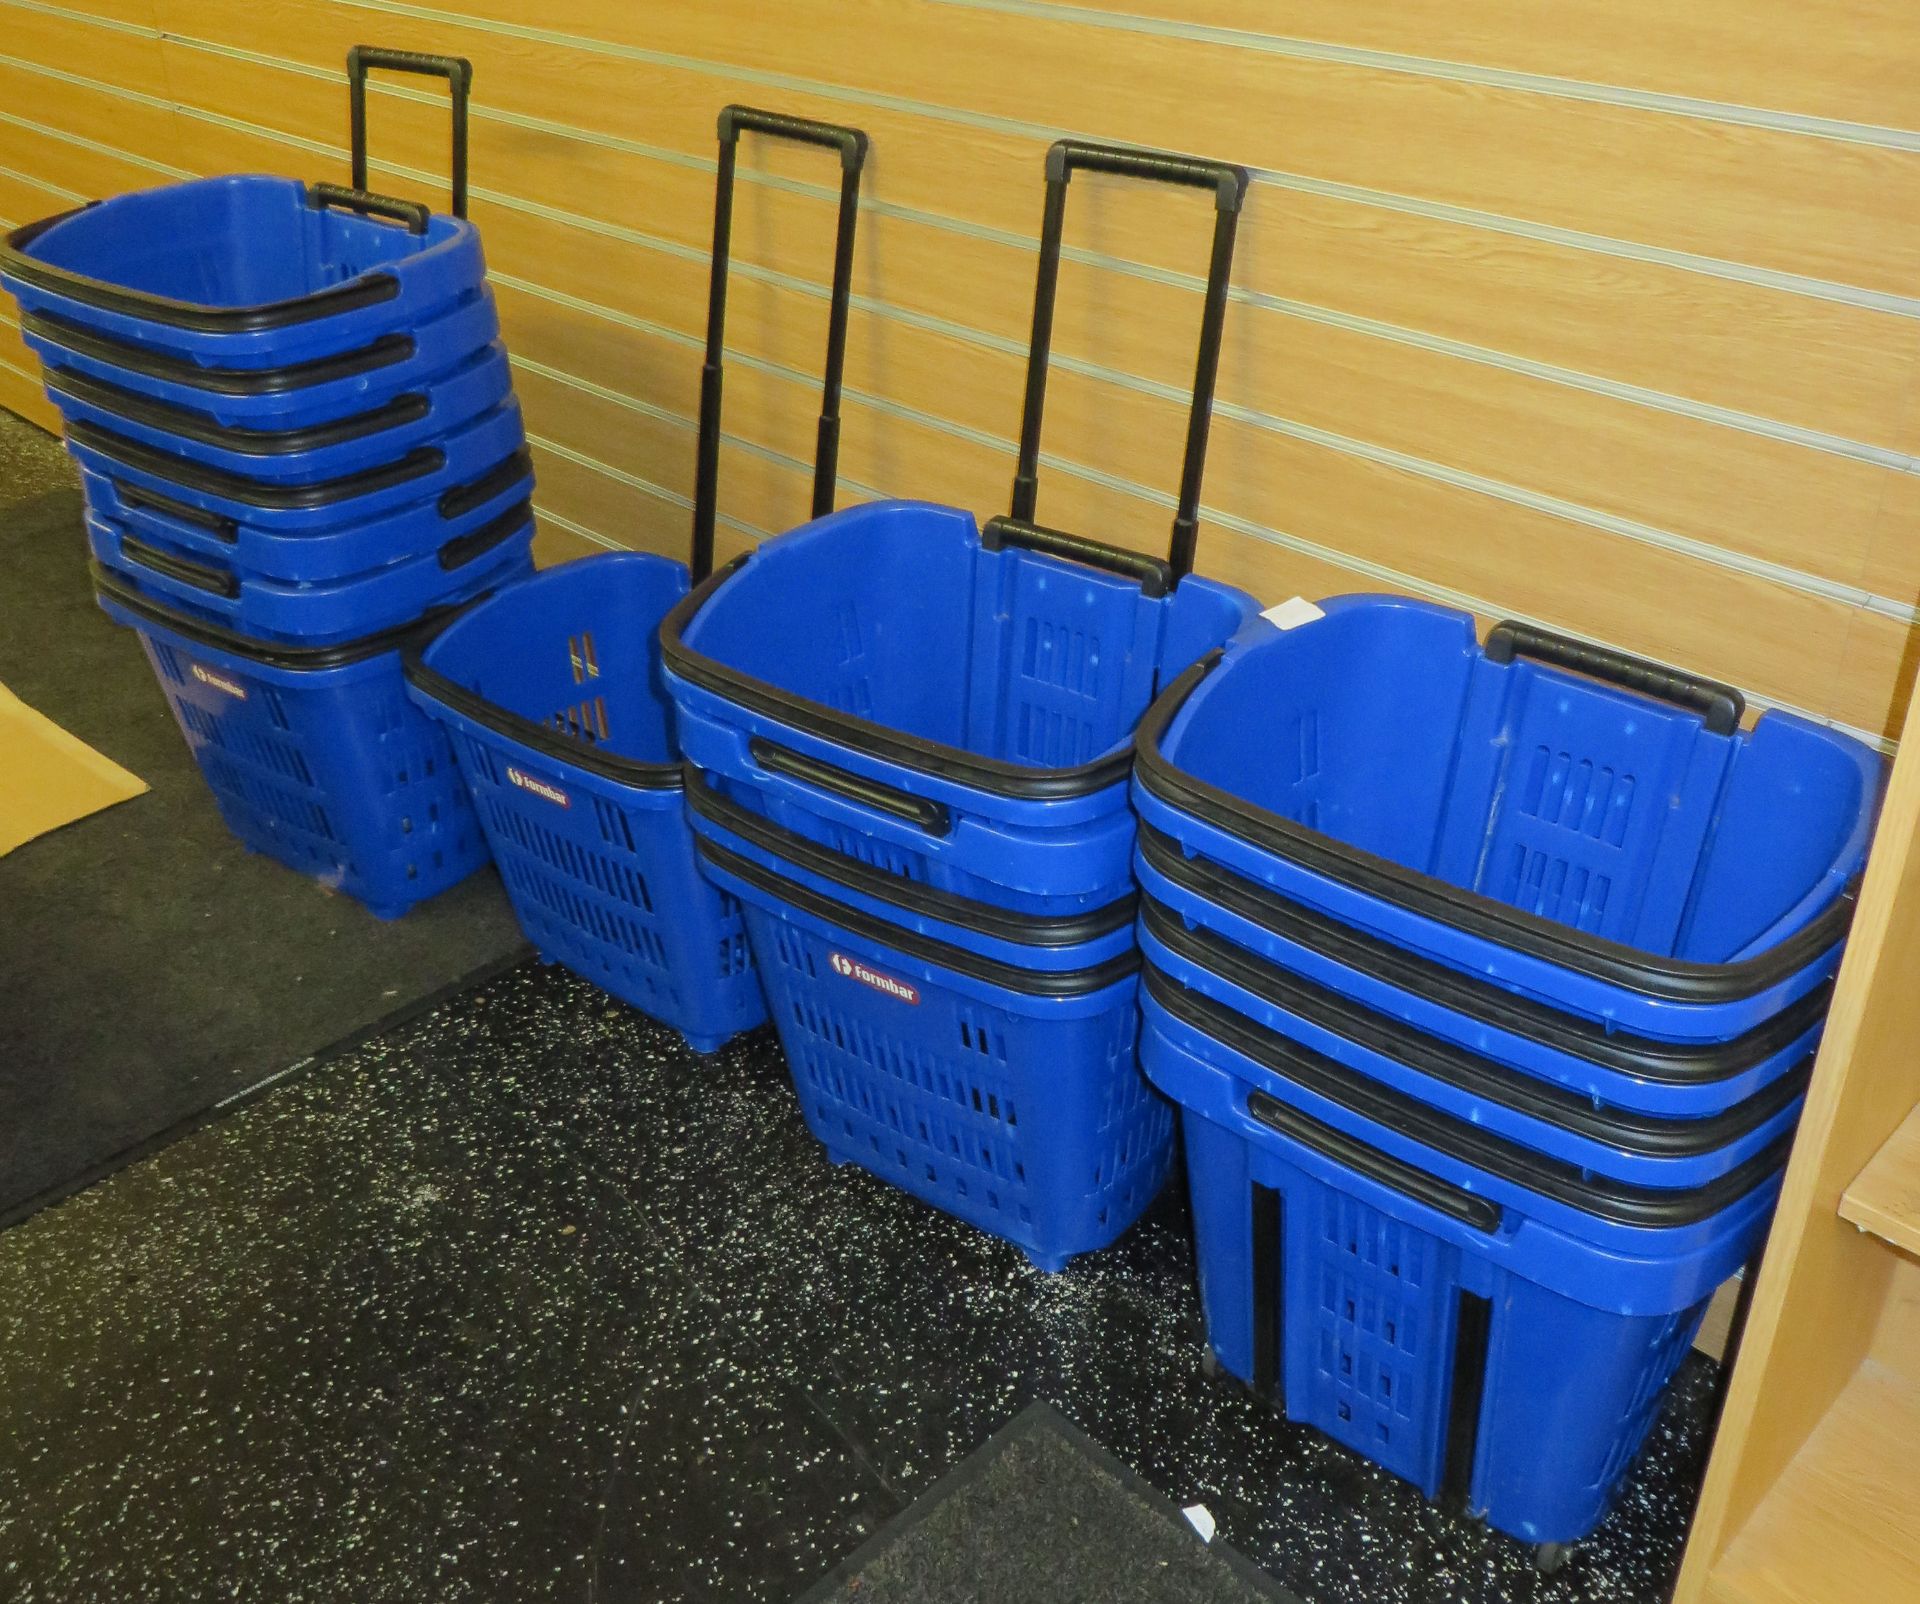 17 x Blue Wheeled Shopping Baskets with Extendable Handles - Ref: 023 - CL173 - Location: Altrincham - Image 3 of 4